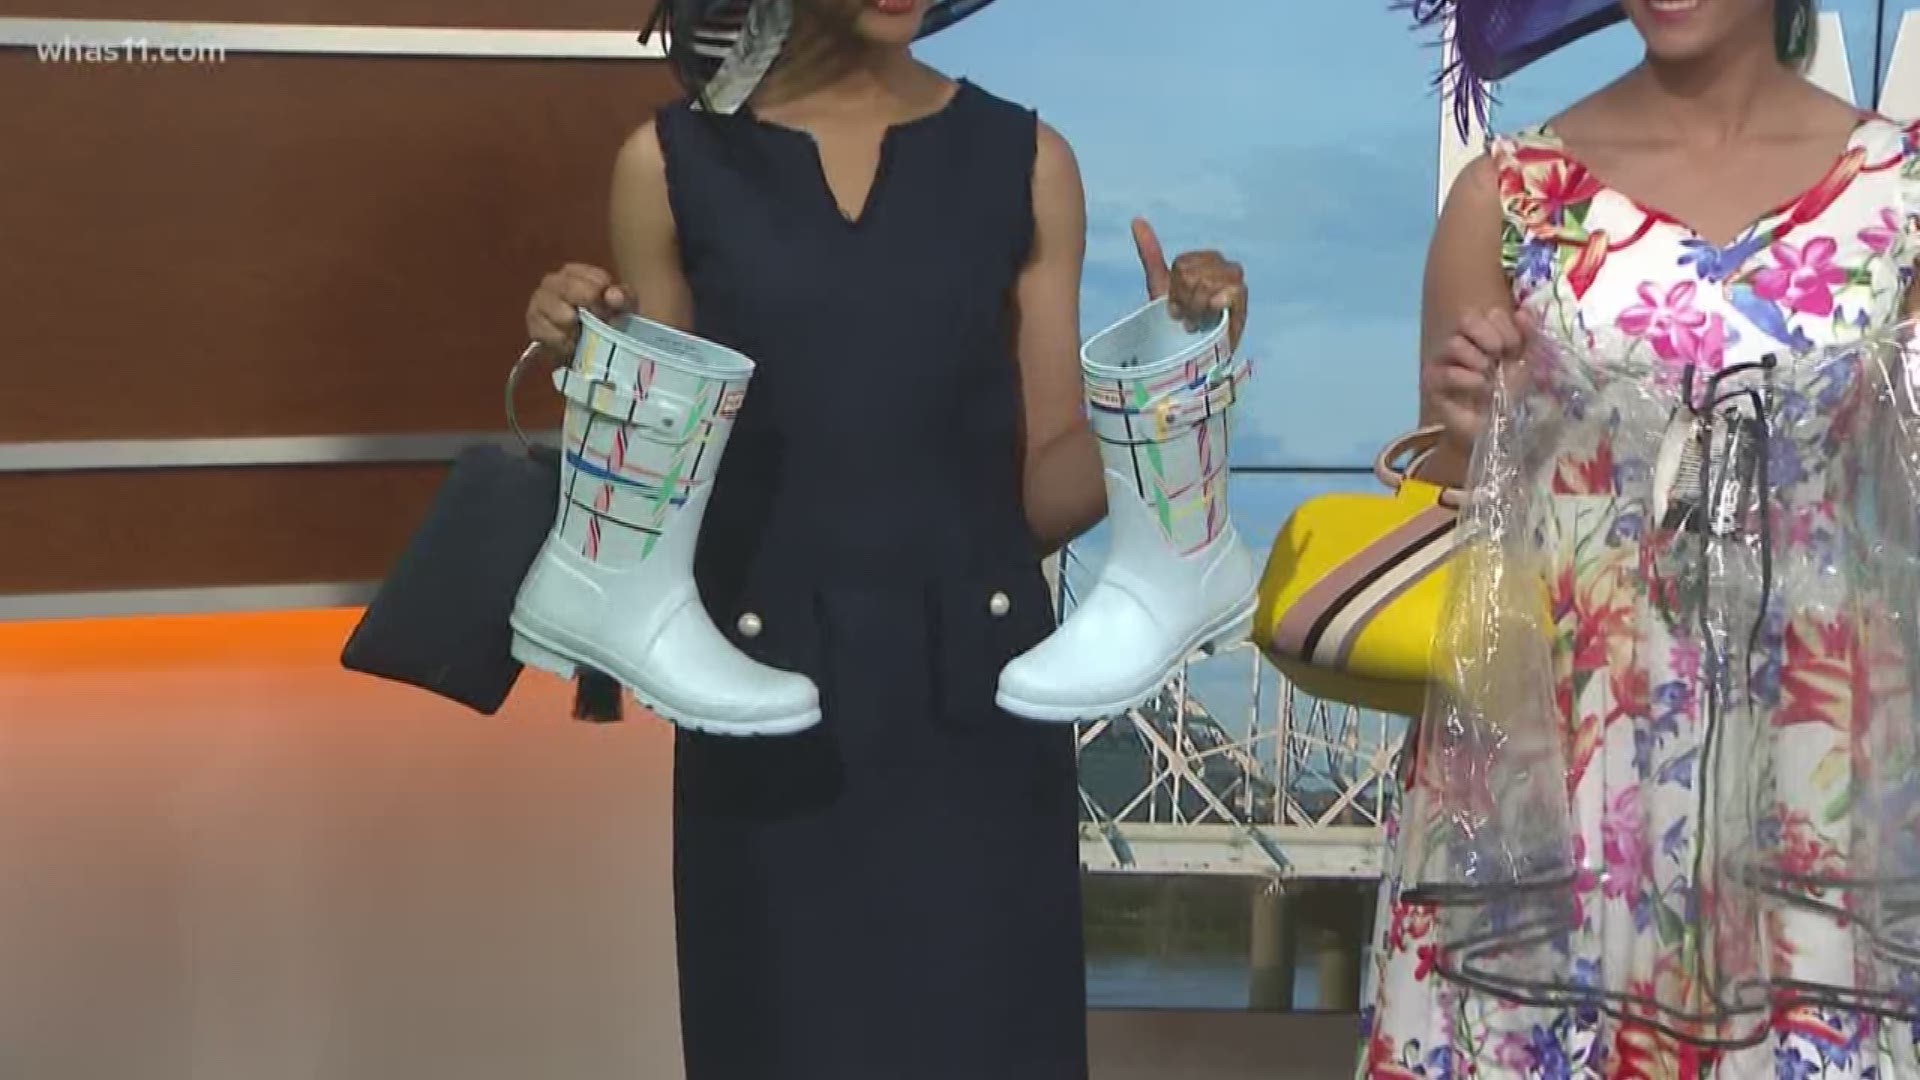 Gabriel Amar and Stylist Jo Ross have fashion tips for a rainy Derby week.